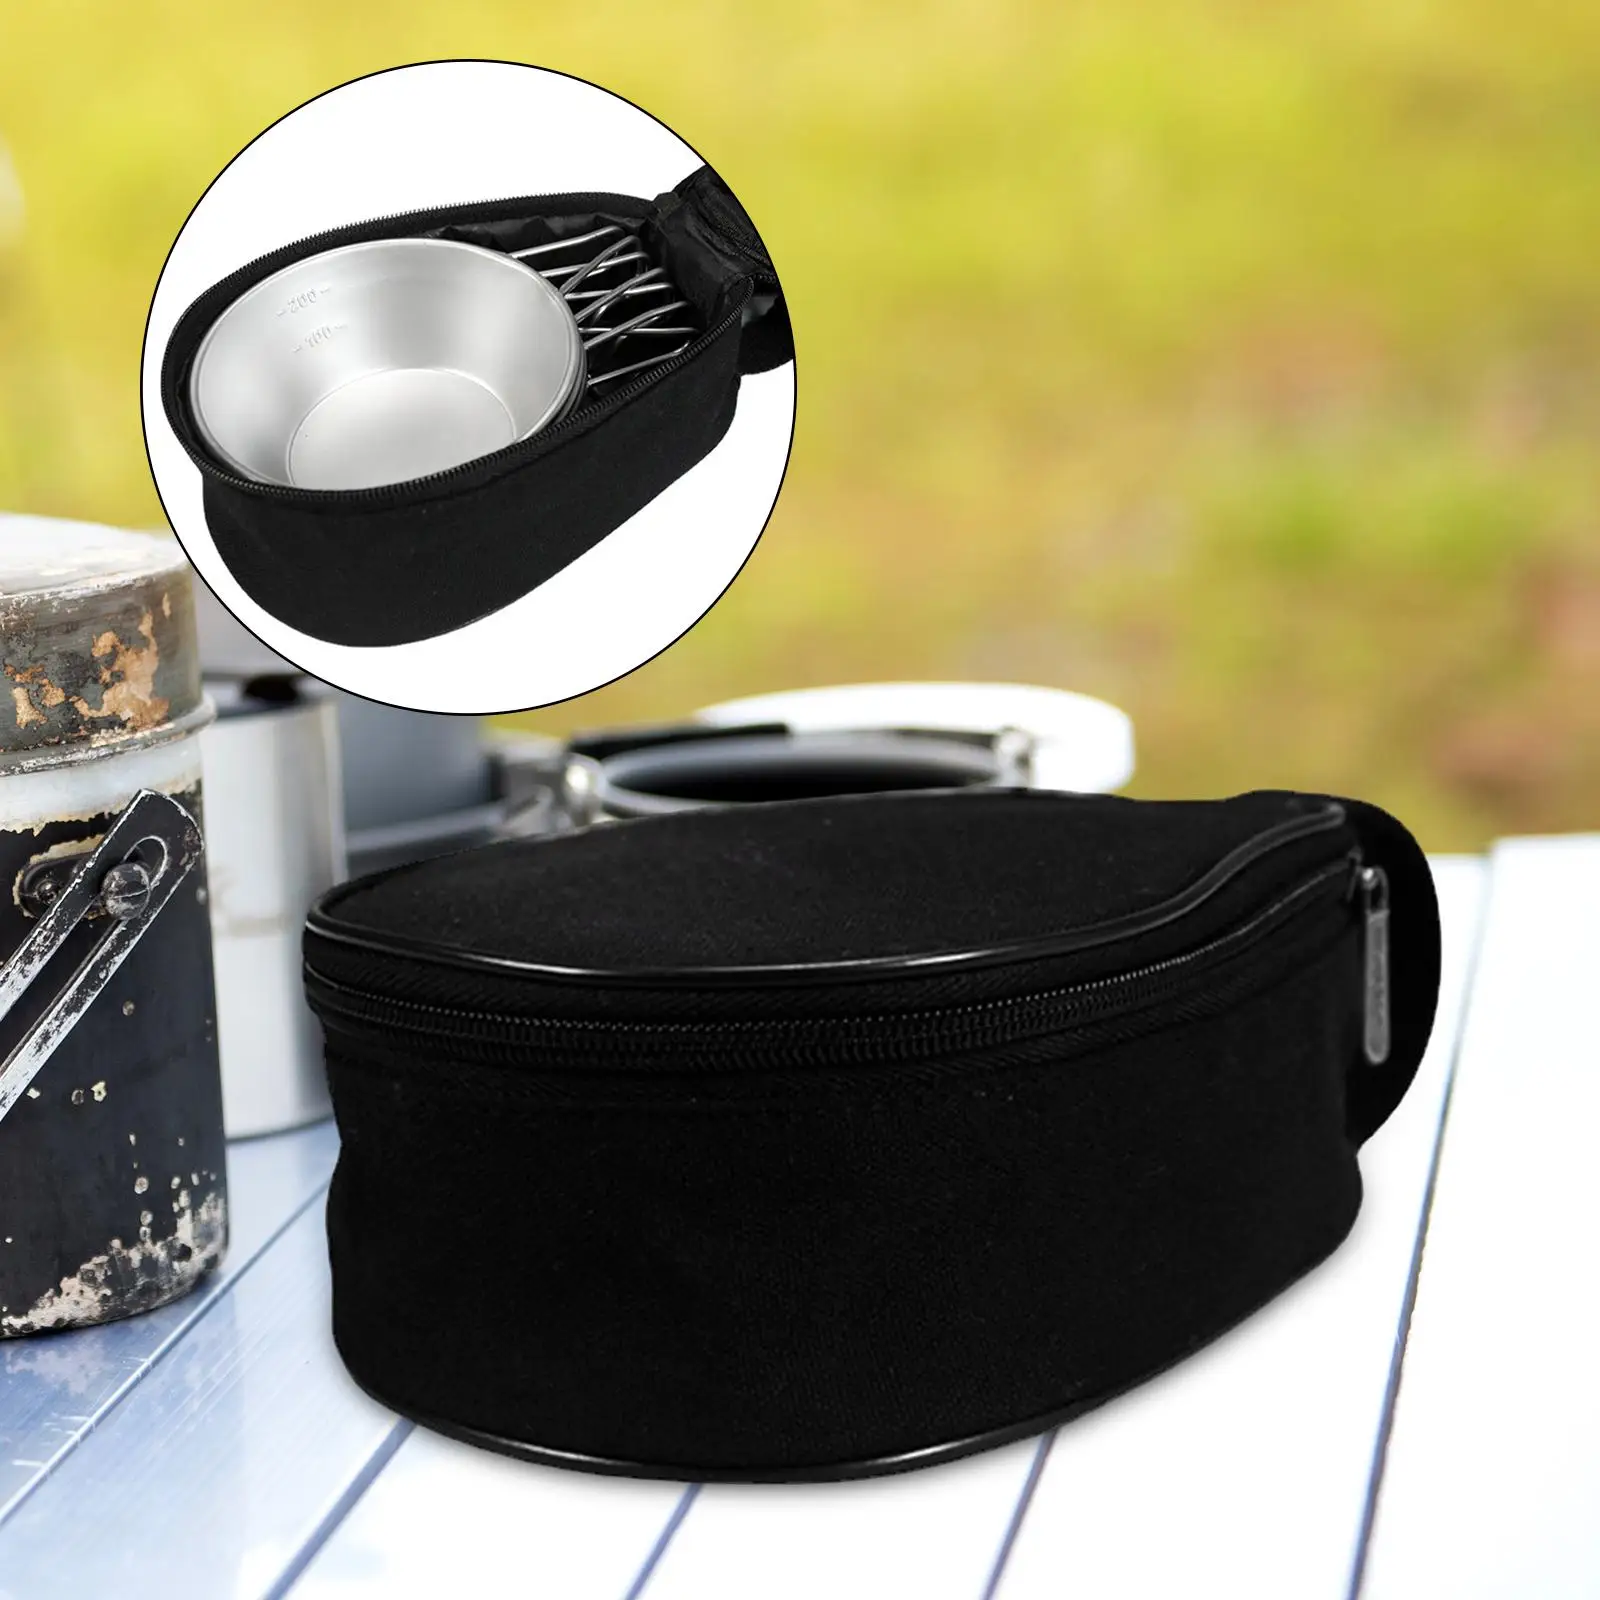 Tableware Bowl Bag Durable Carry Case Activities Waterproof for Picnic Beach